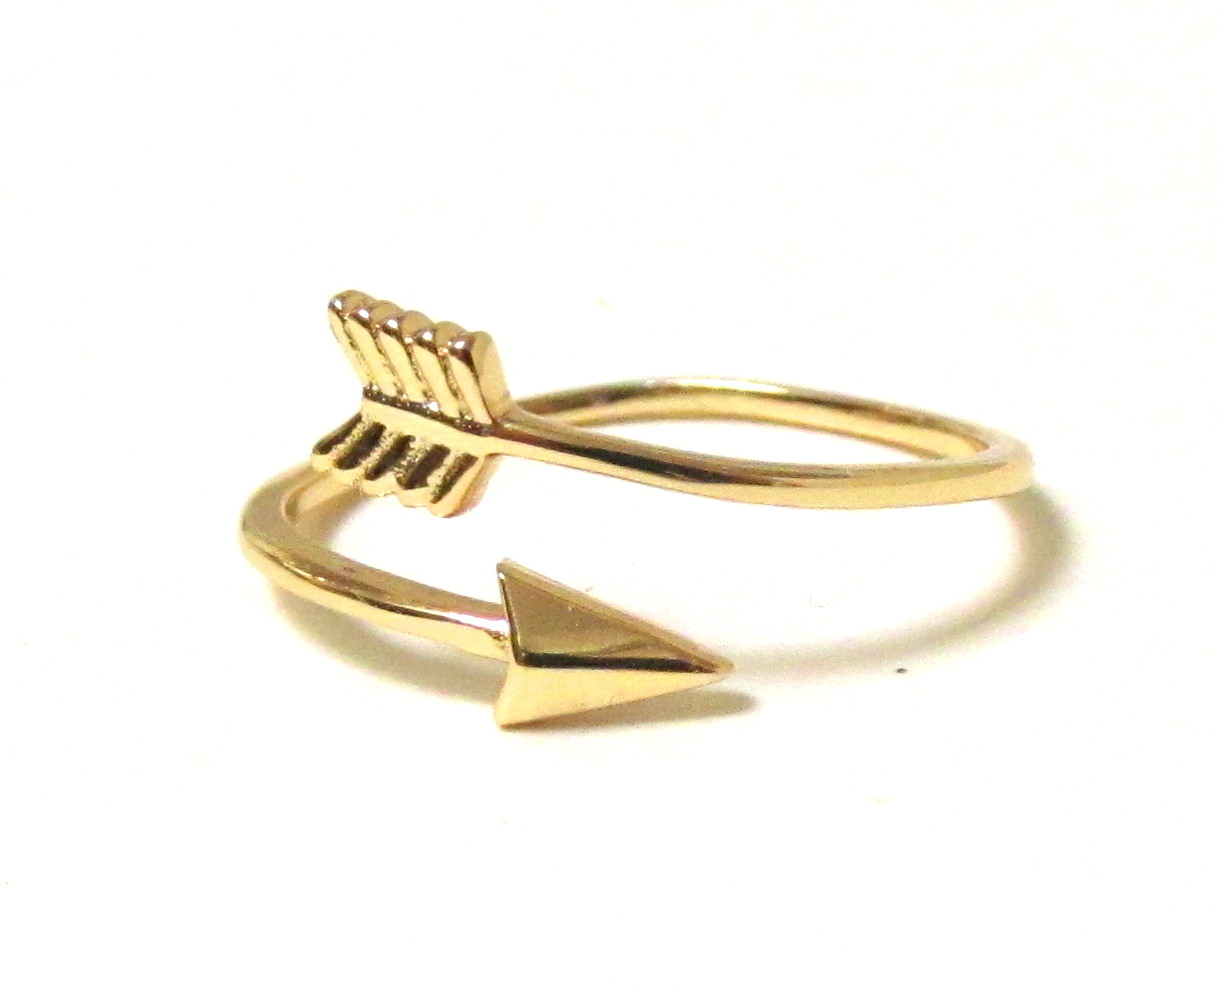 Arrow Ring - 14 Kt Gold Over Sterling Silver Arrow Ring In Size 7